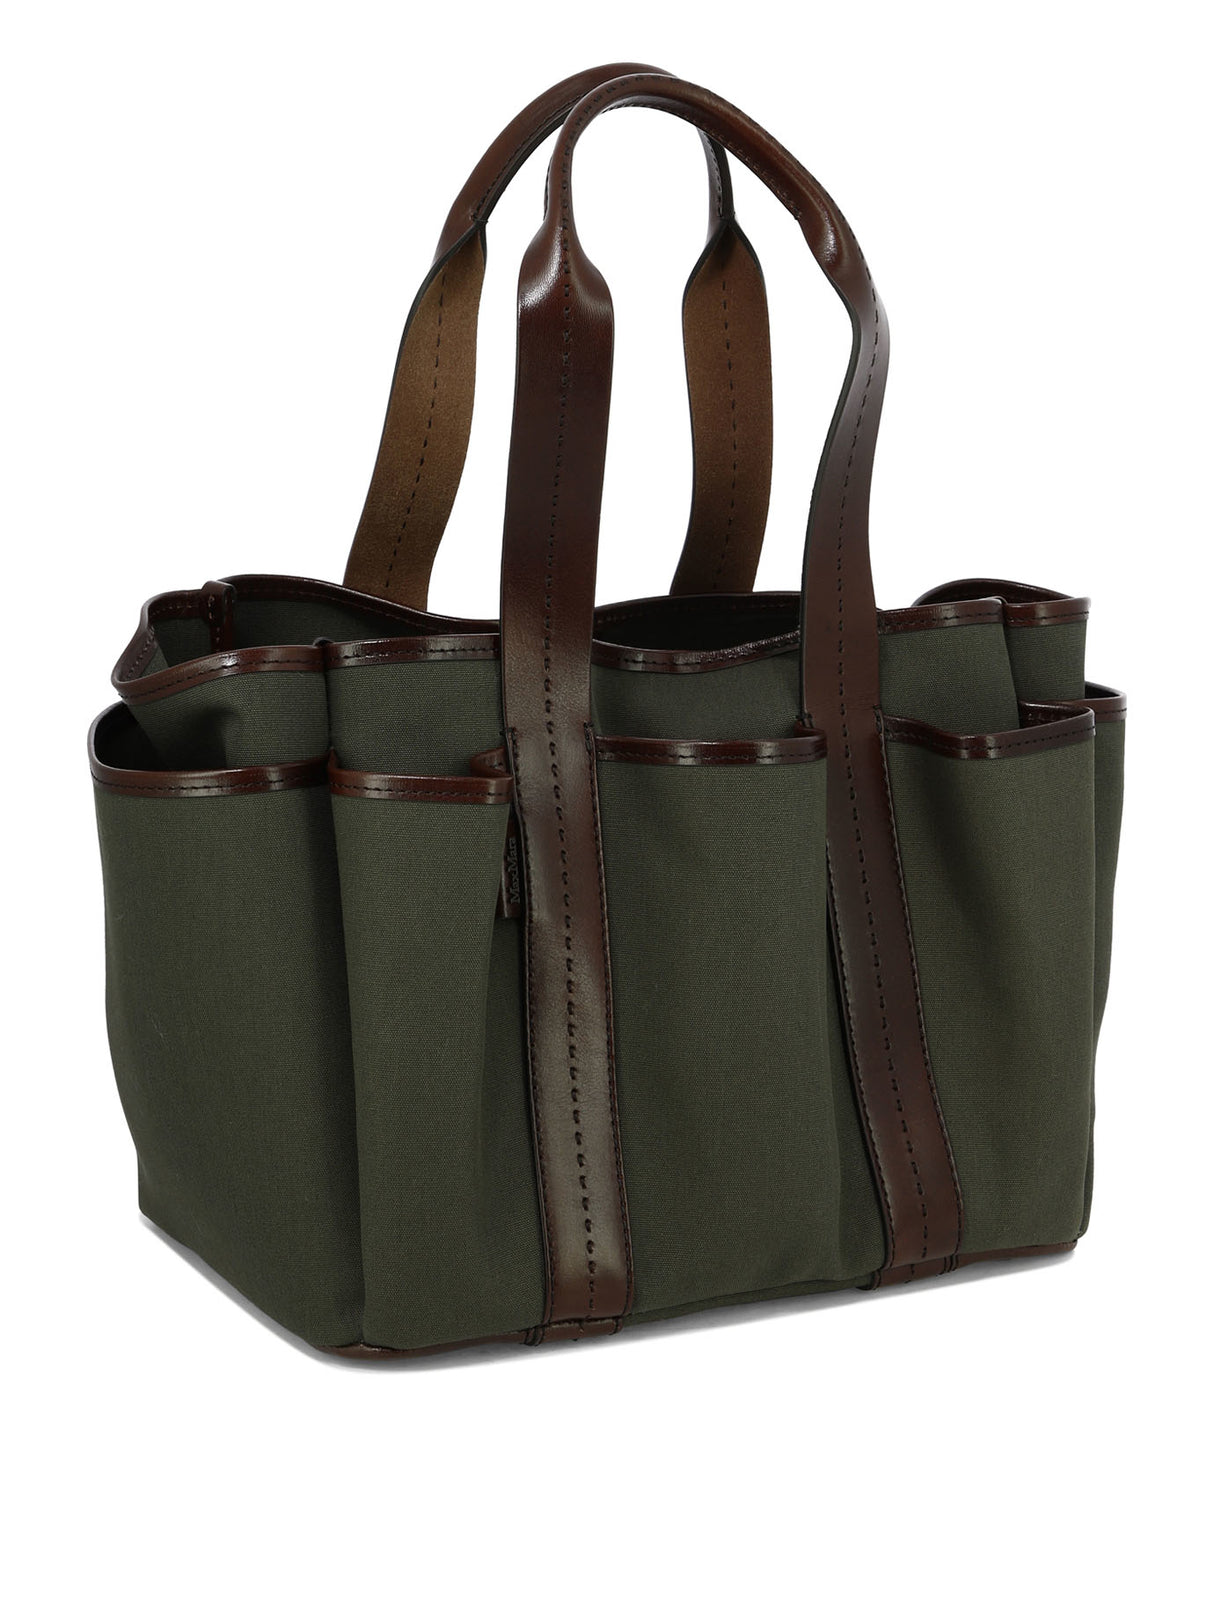 MAX MARA Green Canvas and Leather Tote Handbag for Women